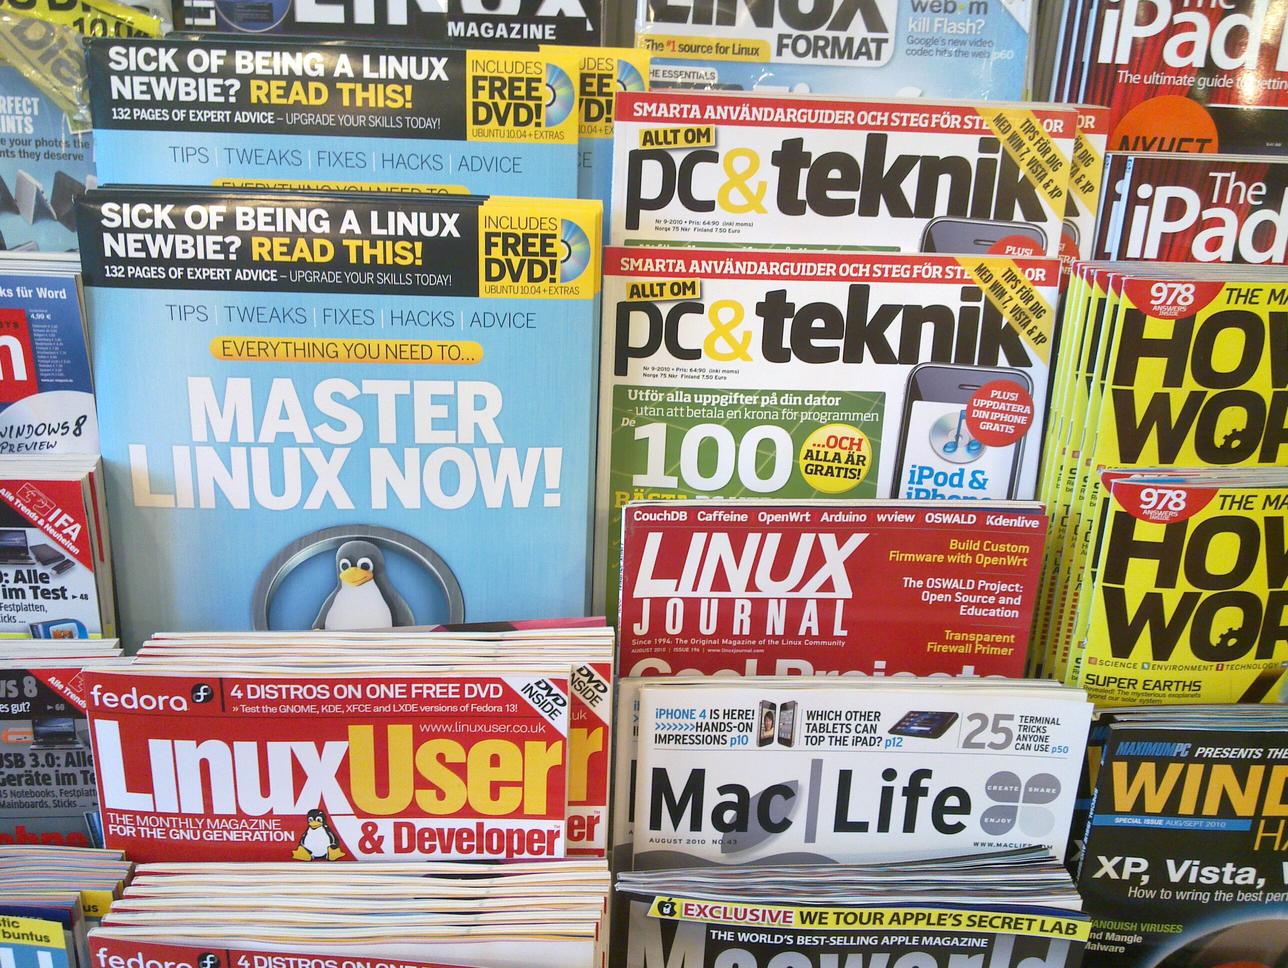 Users & Developers want to Master Linux Now